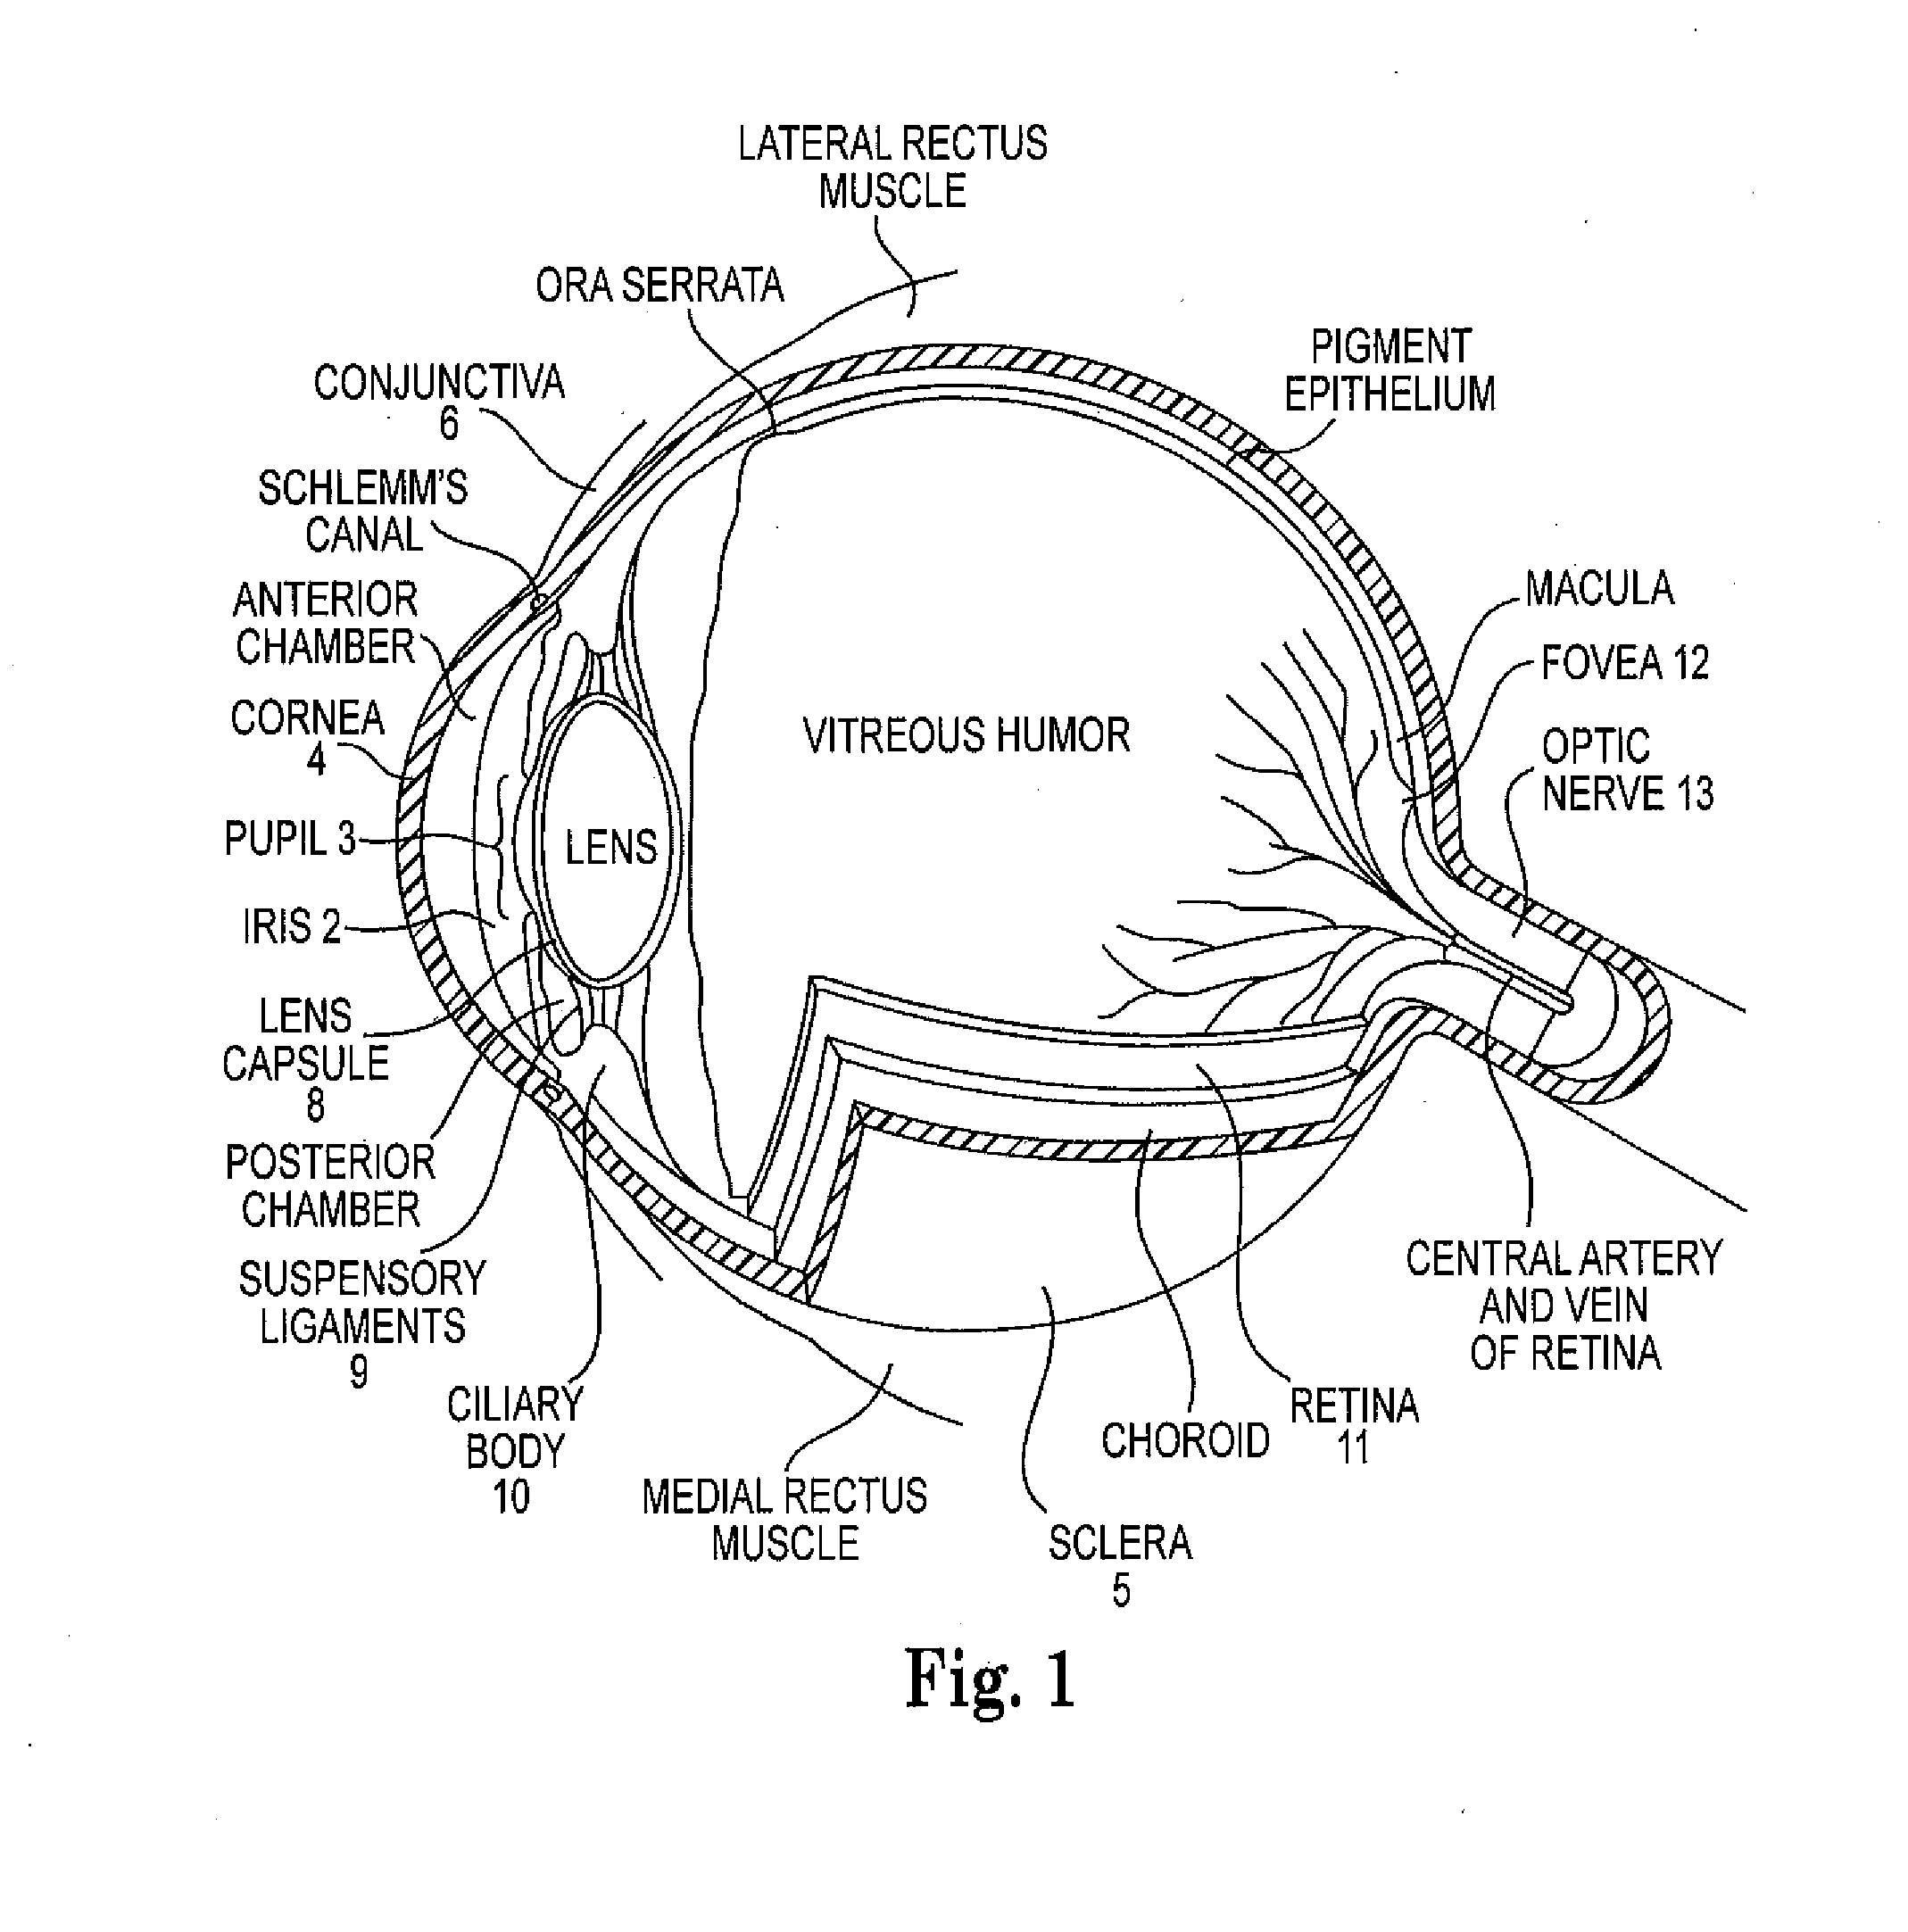 Implantable ocular drug delivery device and methods